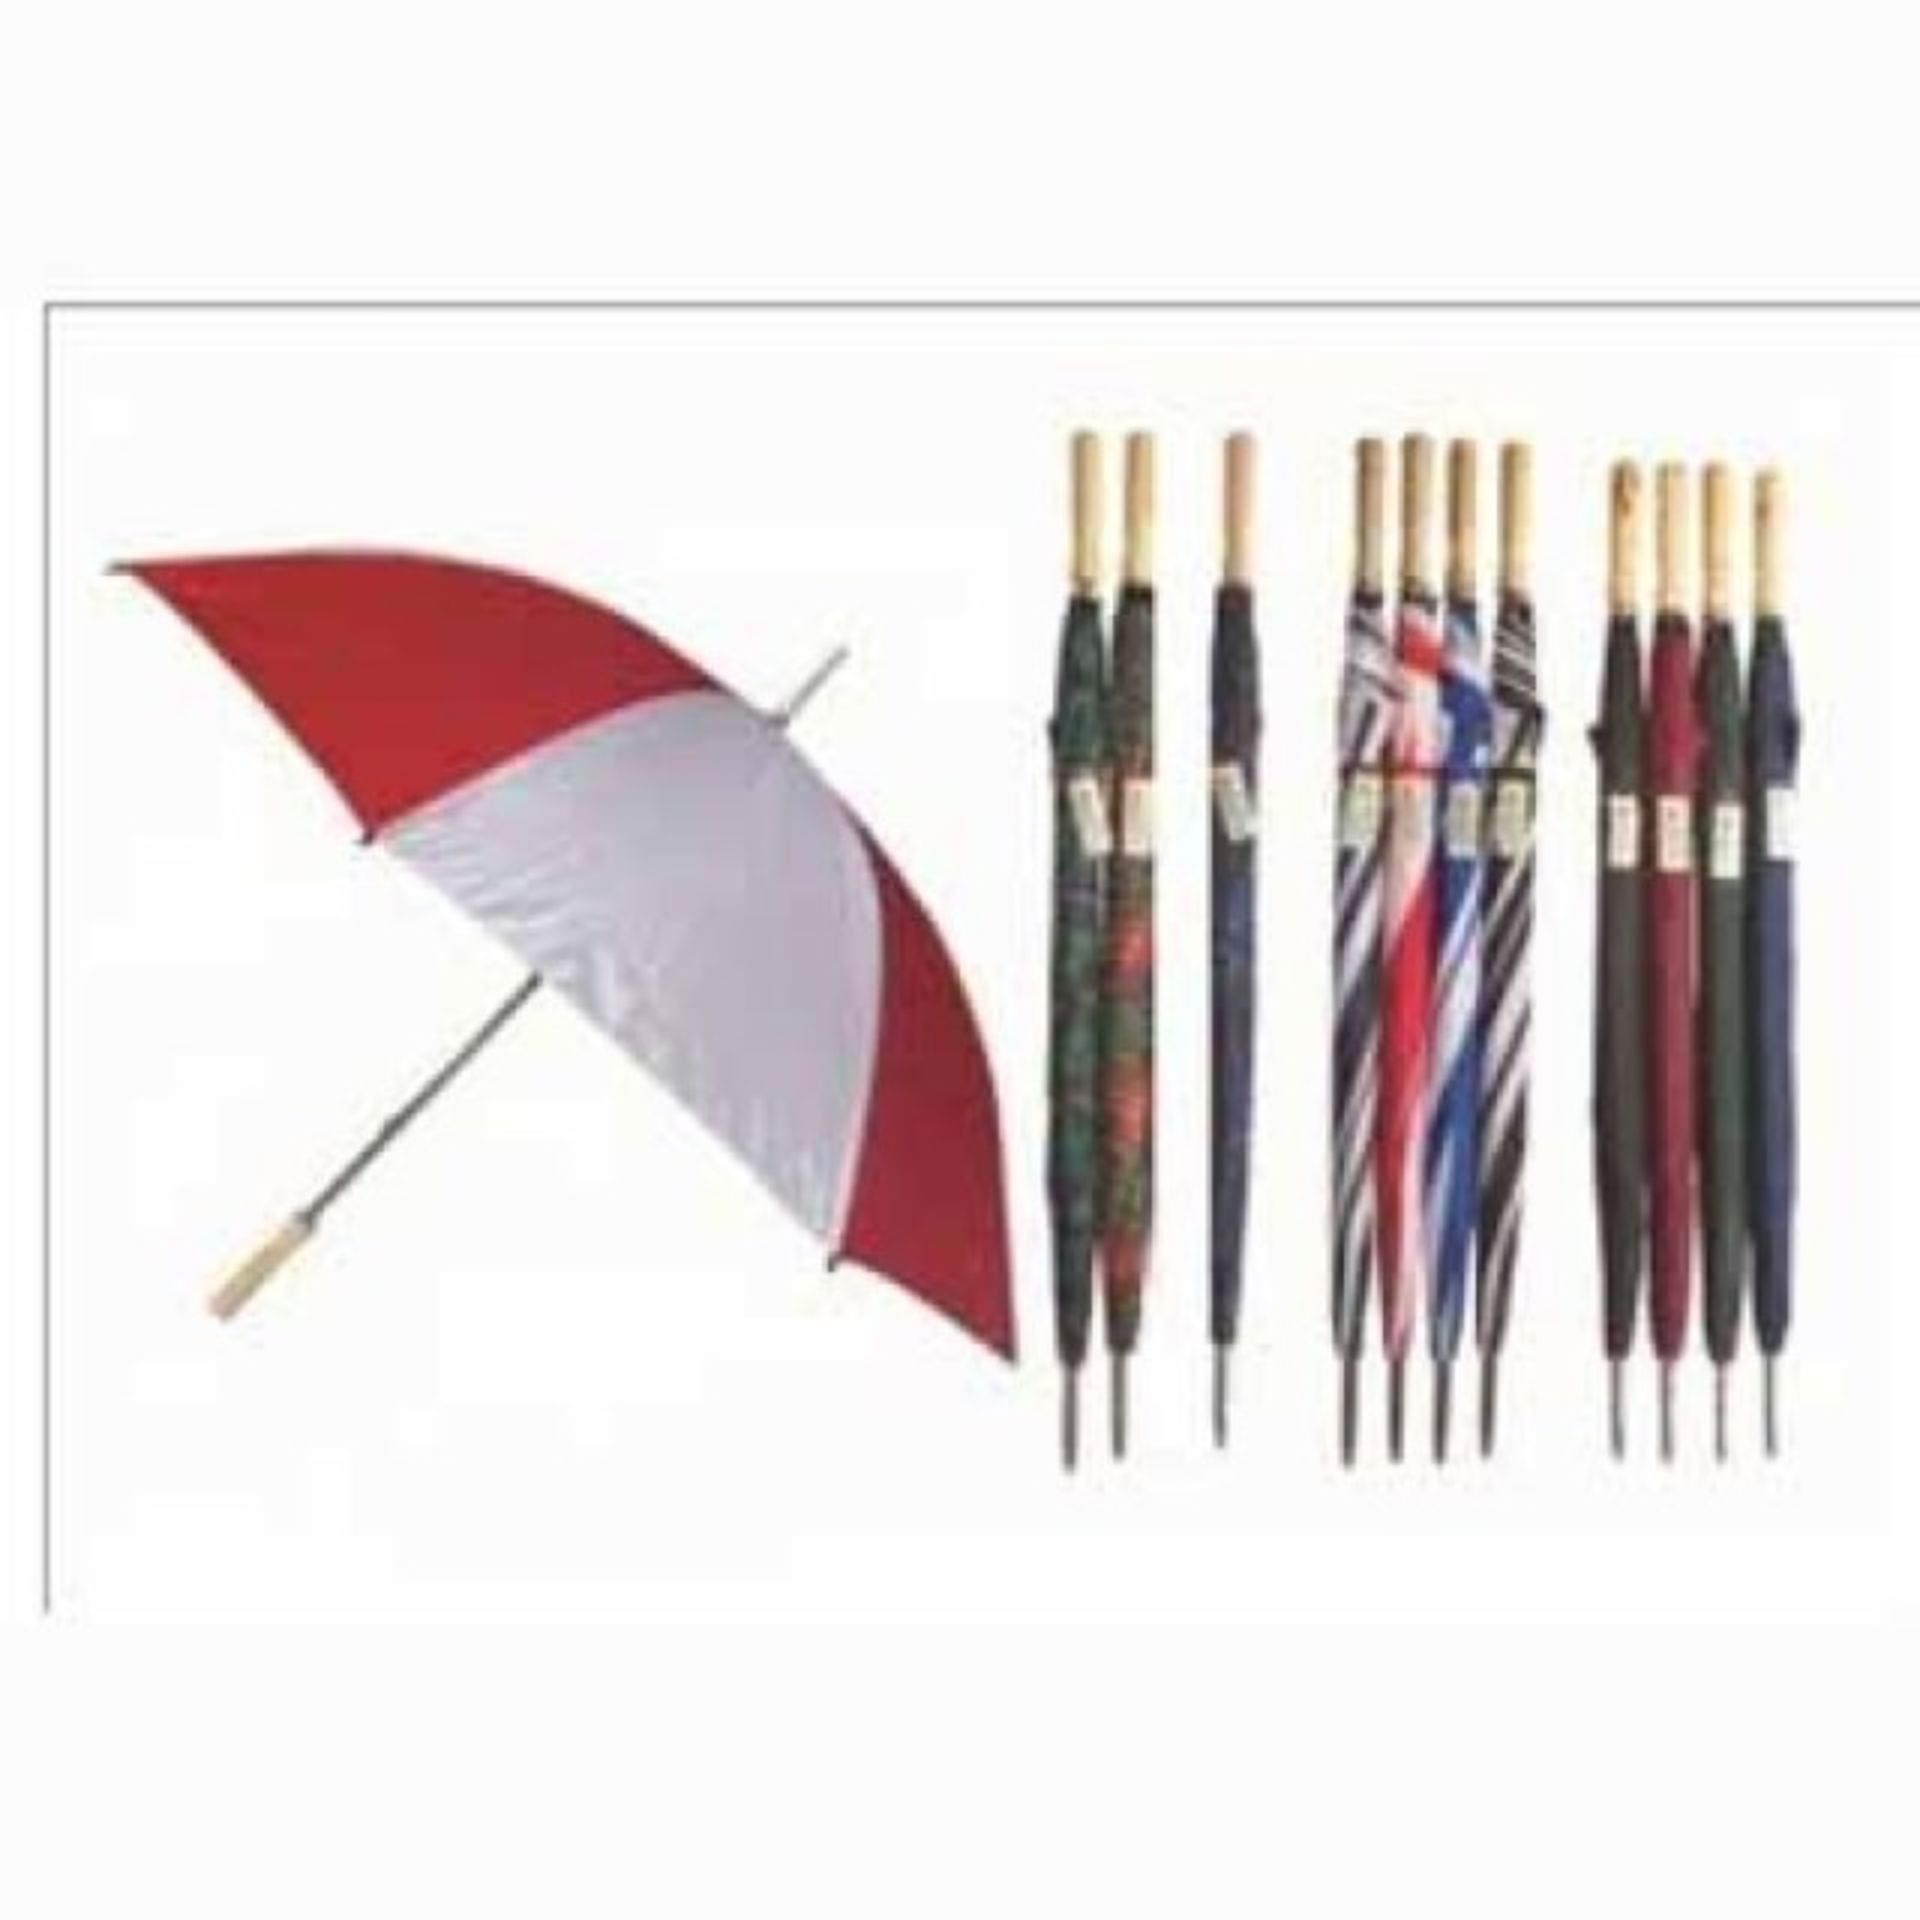 + VAT Brand New Large Umbrella Various Colours and Patterns